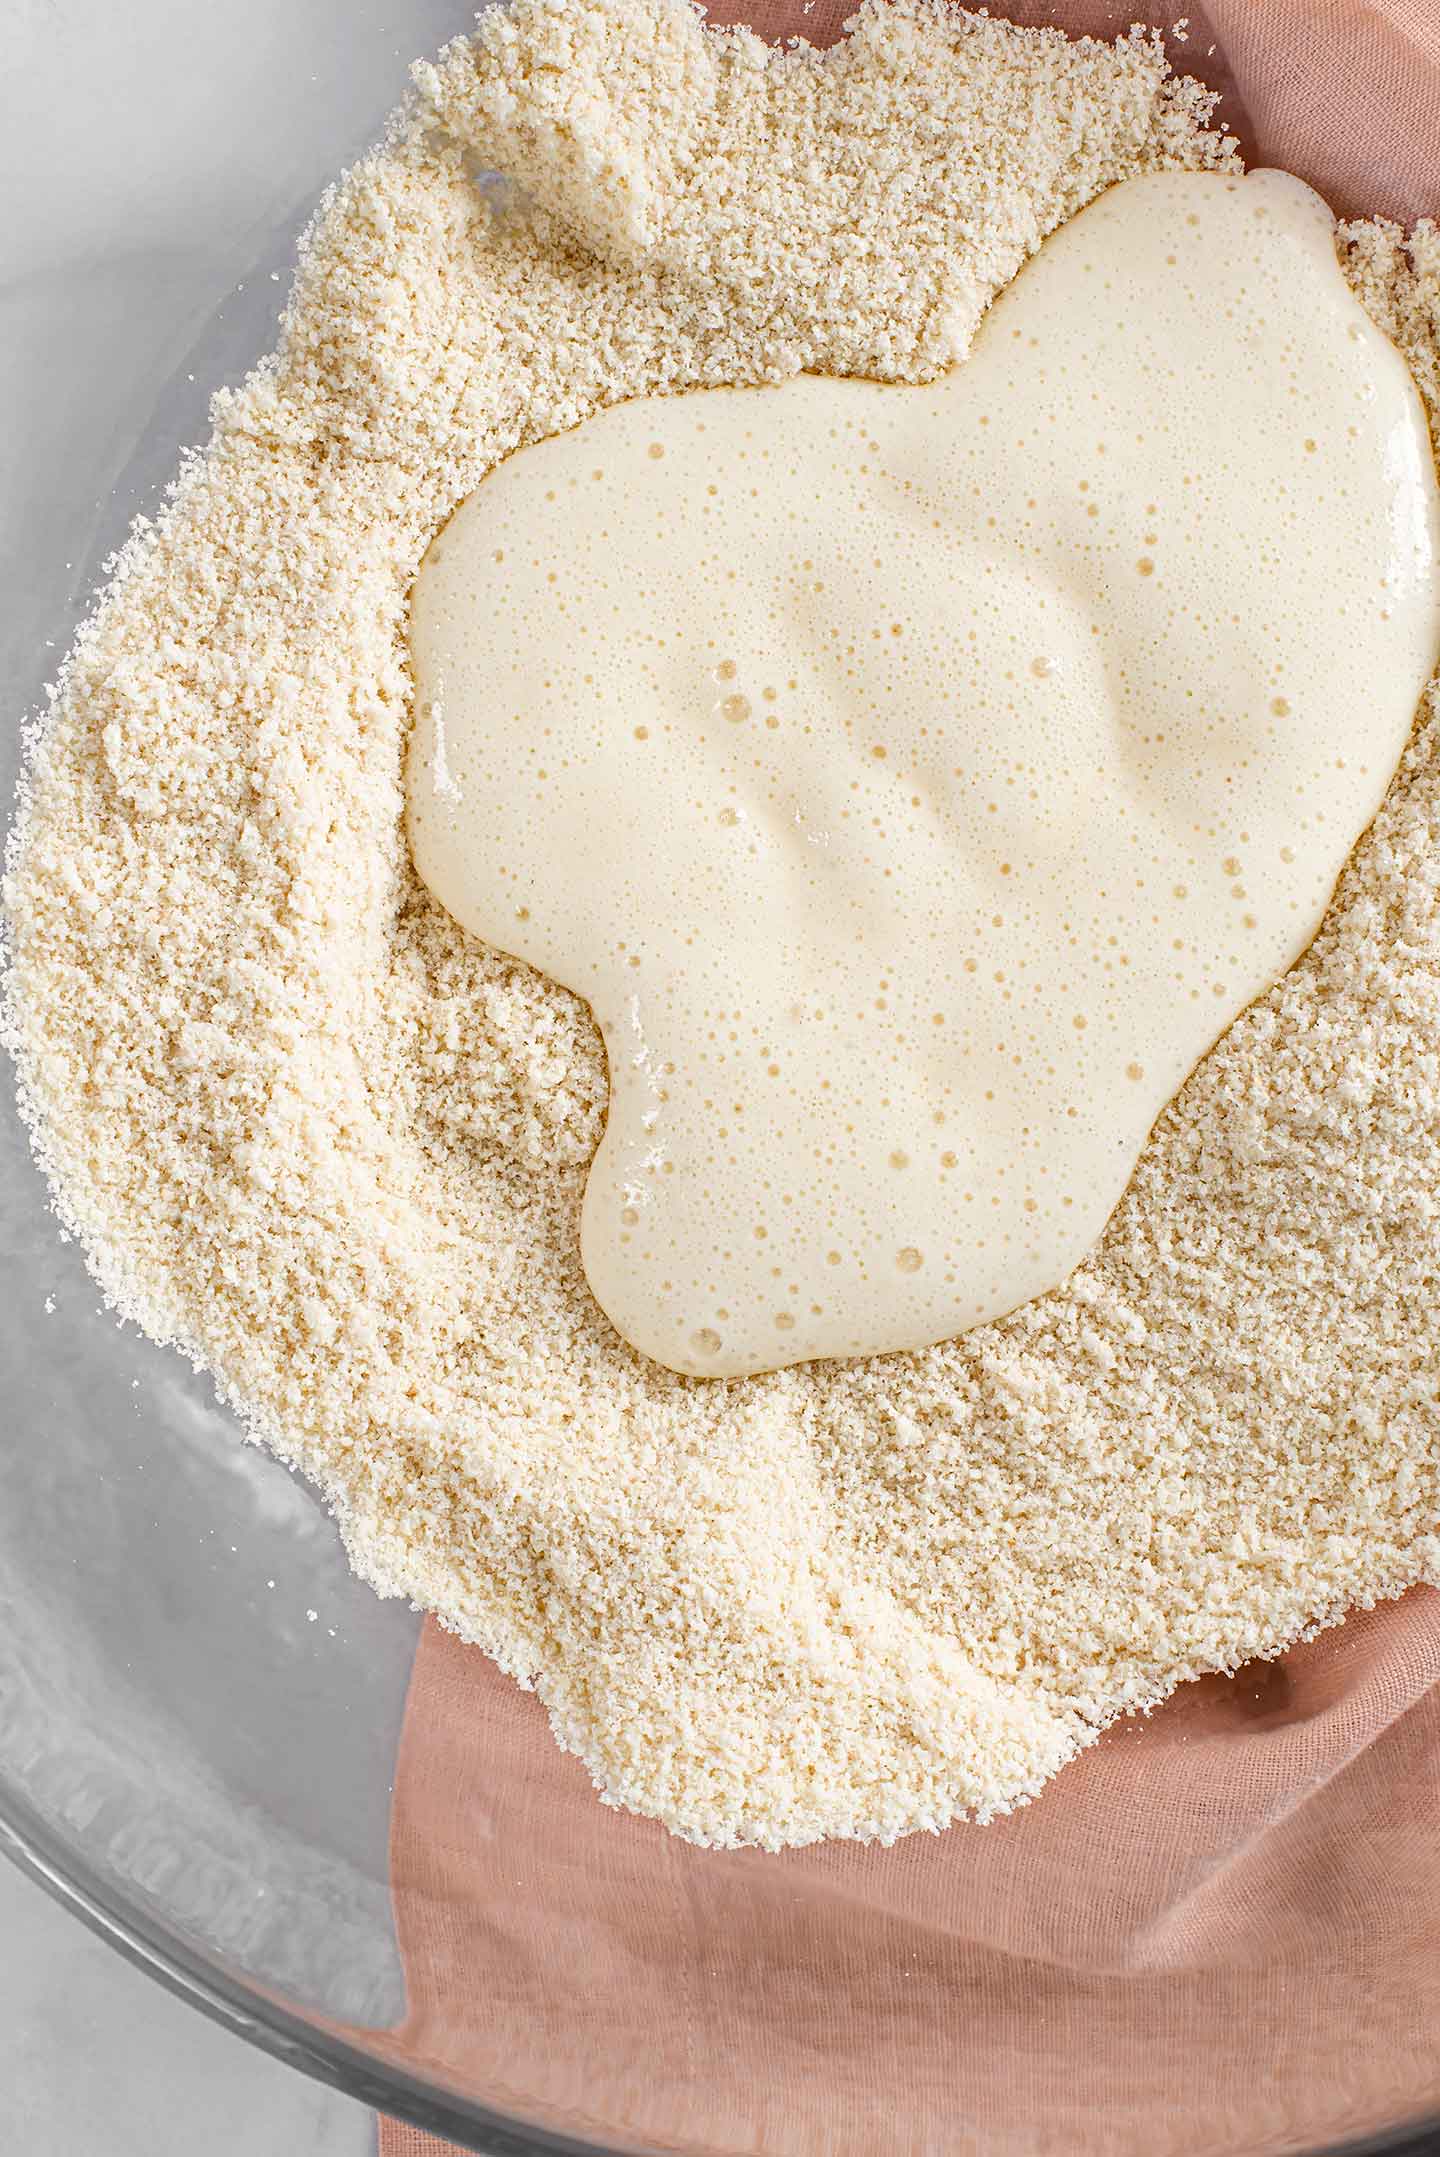 Top down view of almond flour in a mixing bowl with the wet ingredients being poured over top.